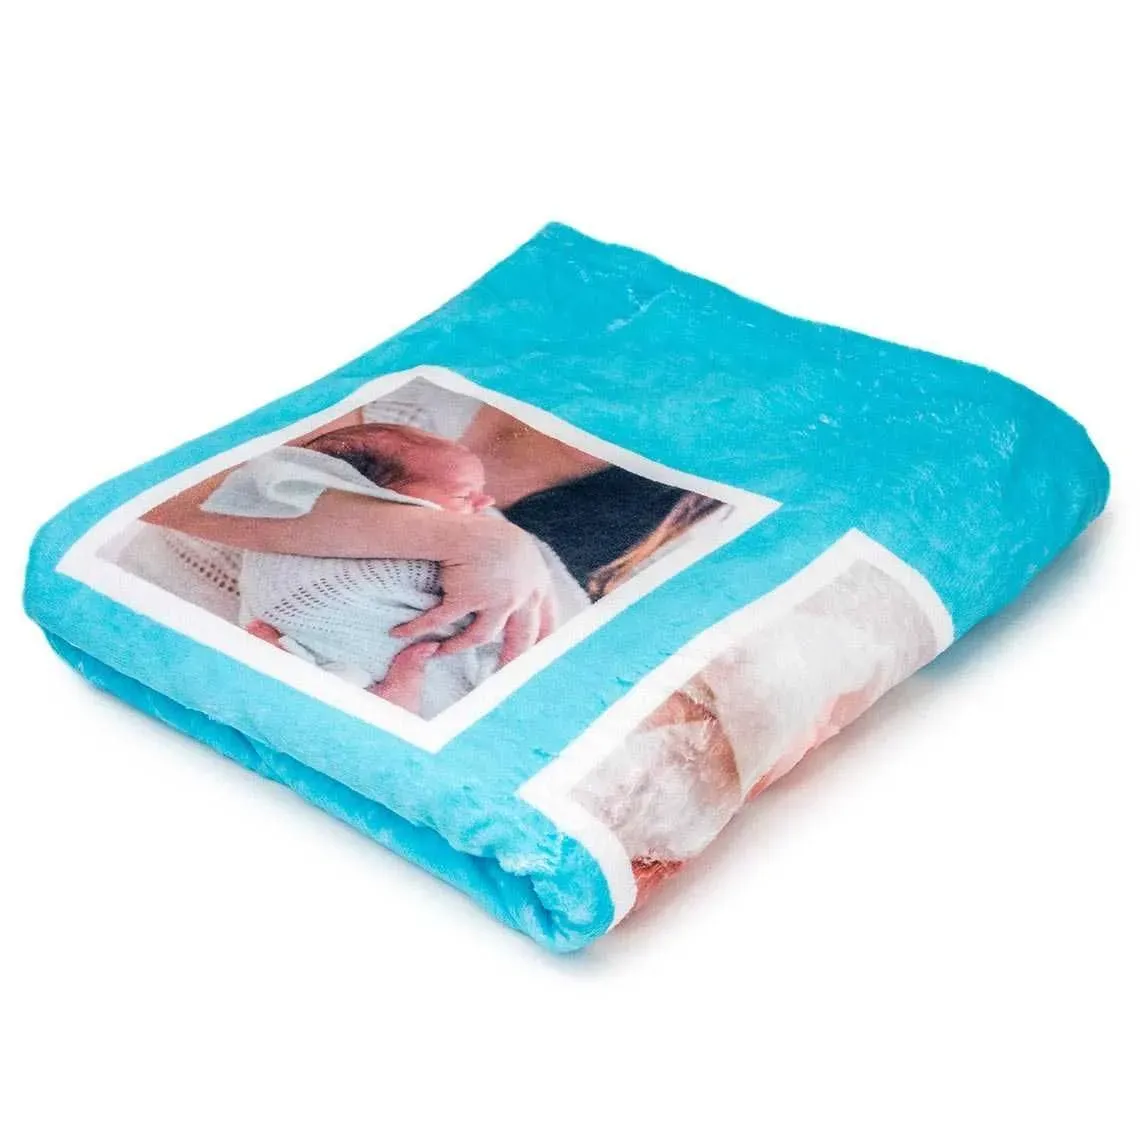 Blue blanket with a photo of a newborn being held by a mother printed onto it